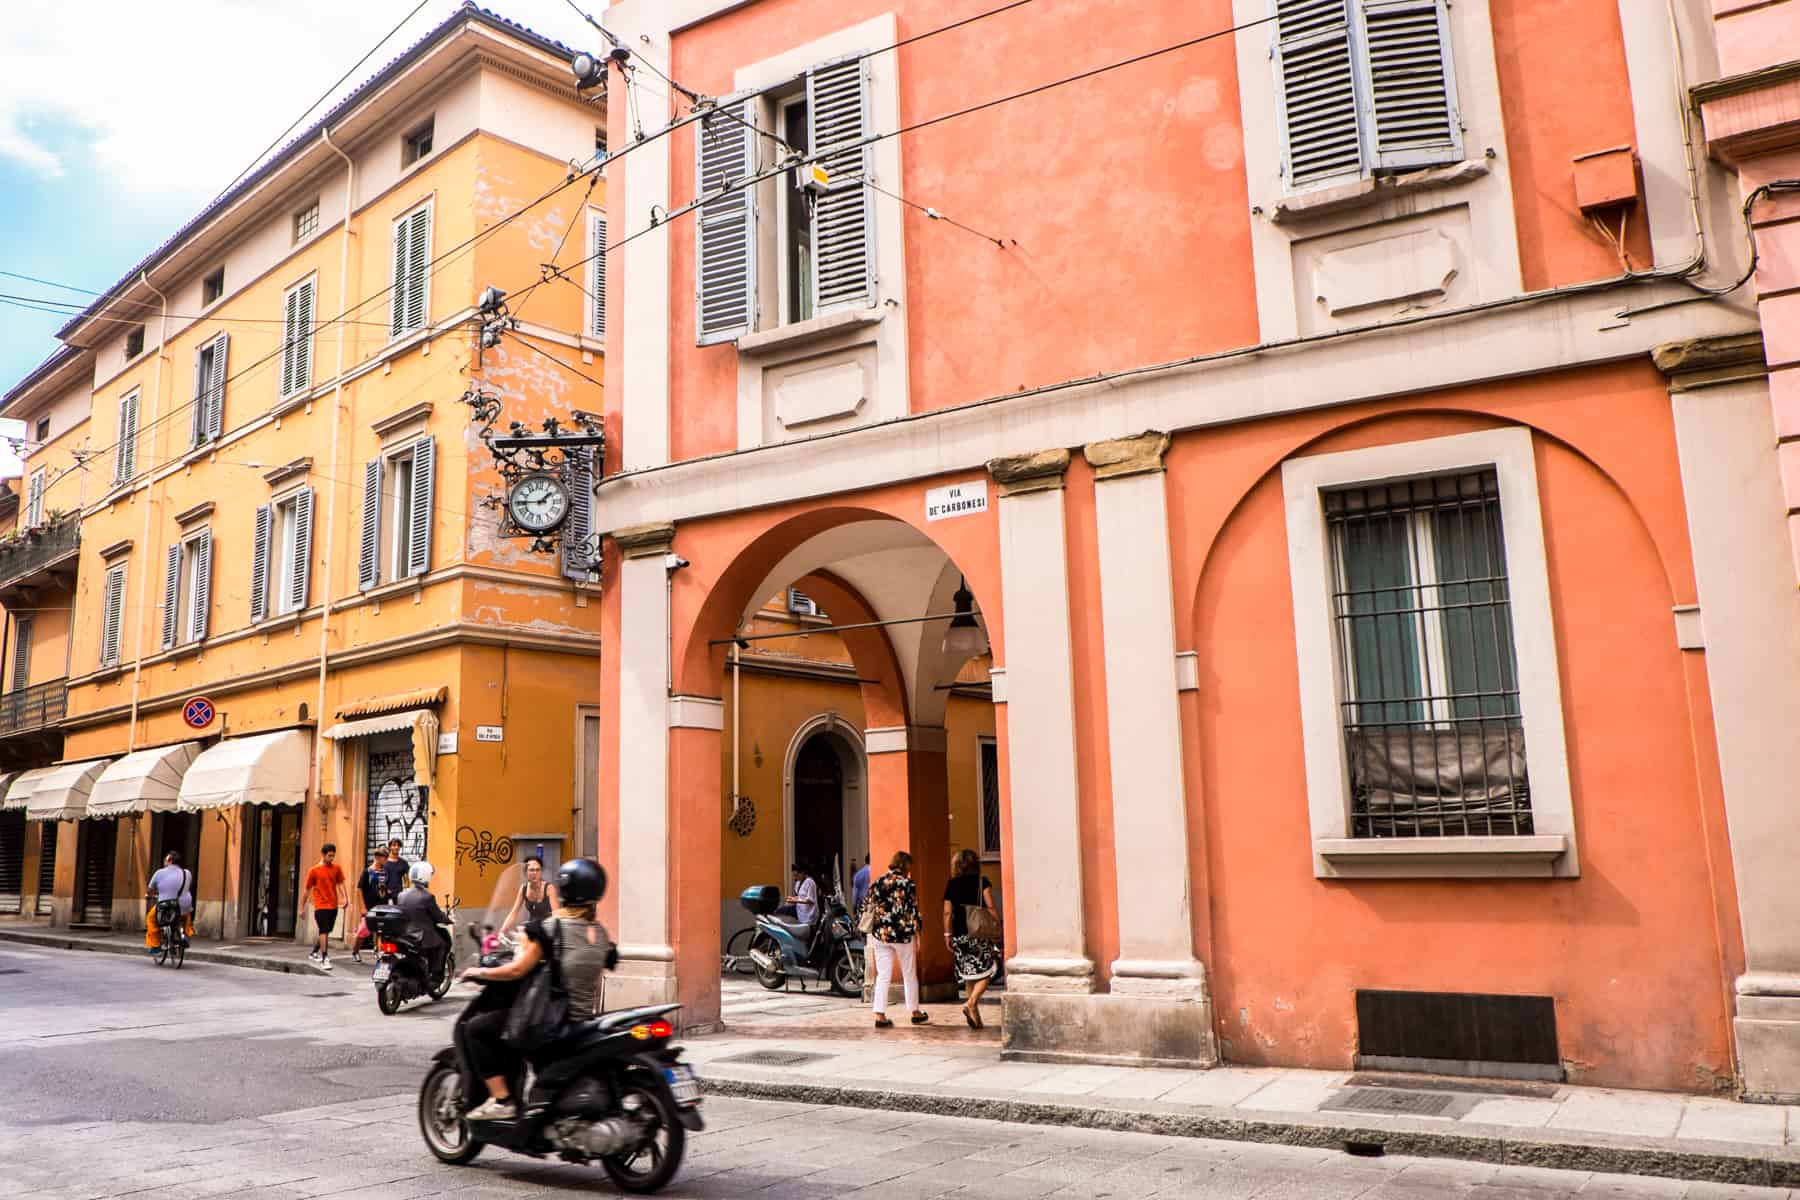 A woman on a motorbike ride past an orange building in Bologna, which stands next to a similar structure painted in yellow. 